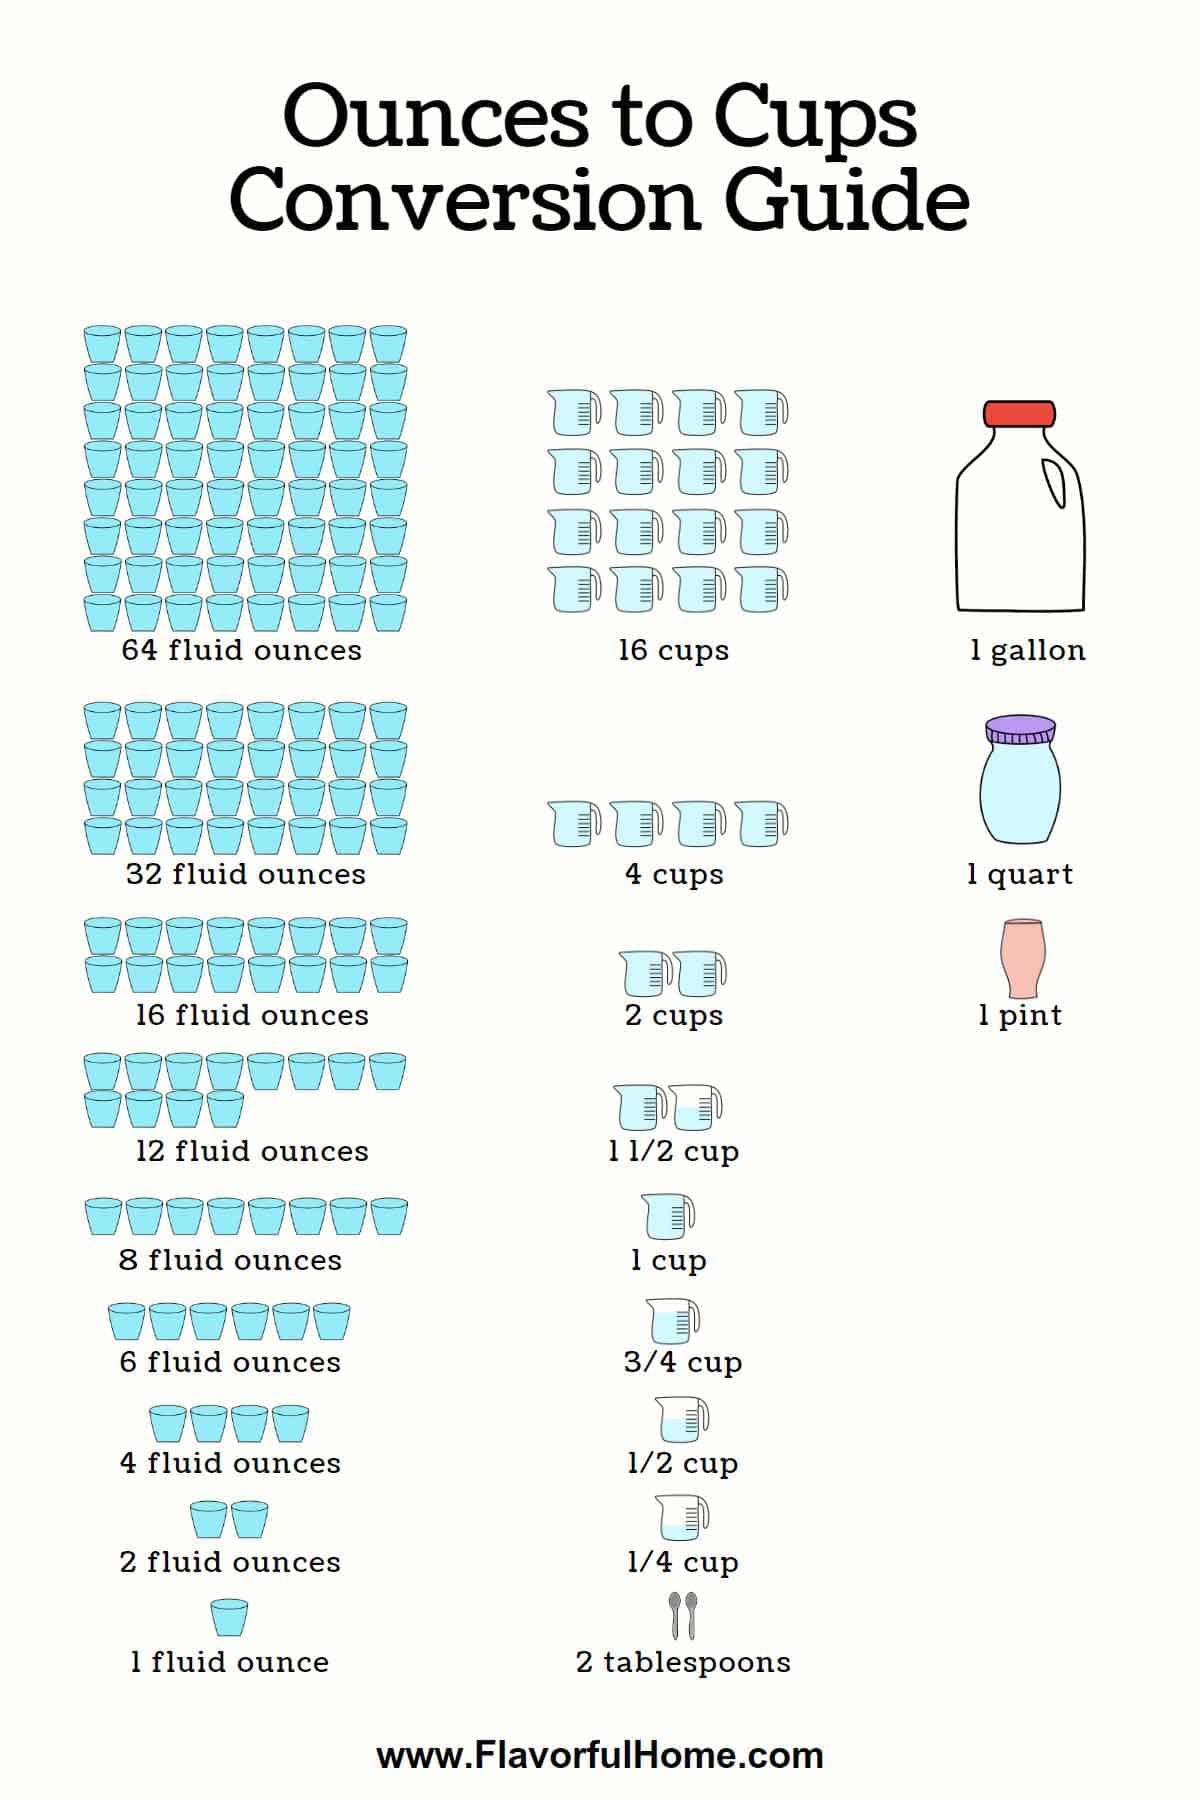 Infographic showing cups conversions